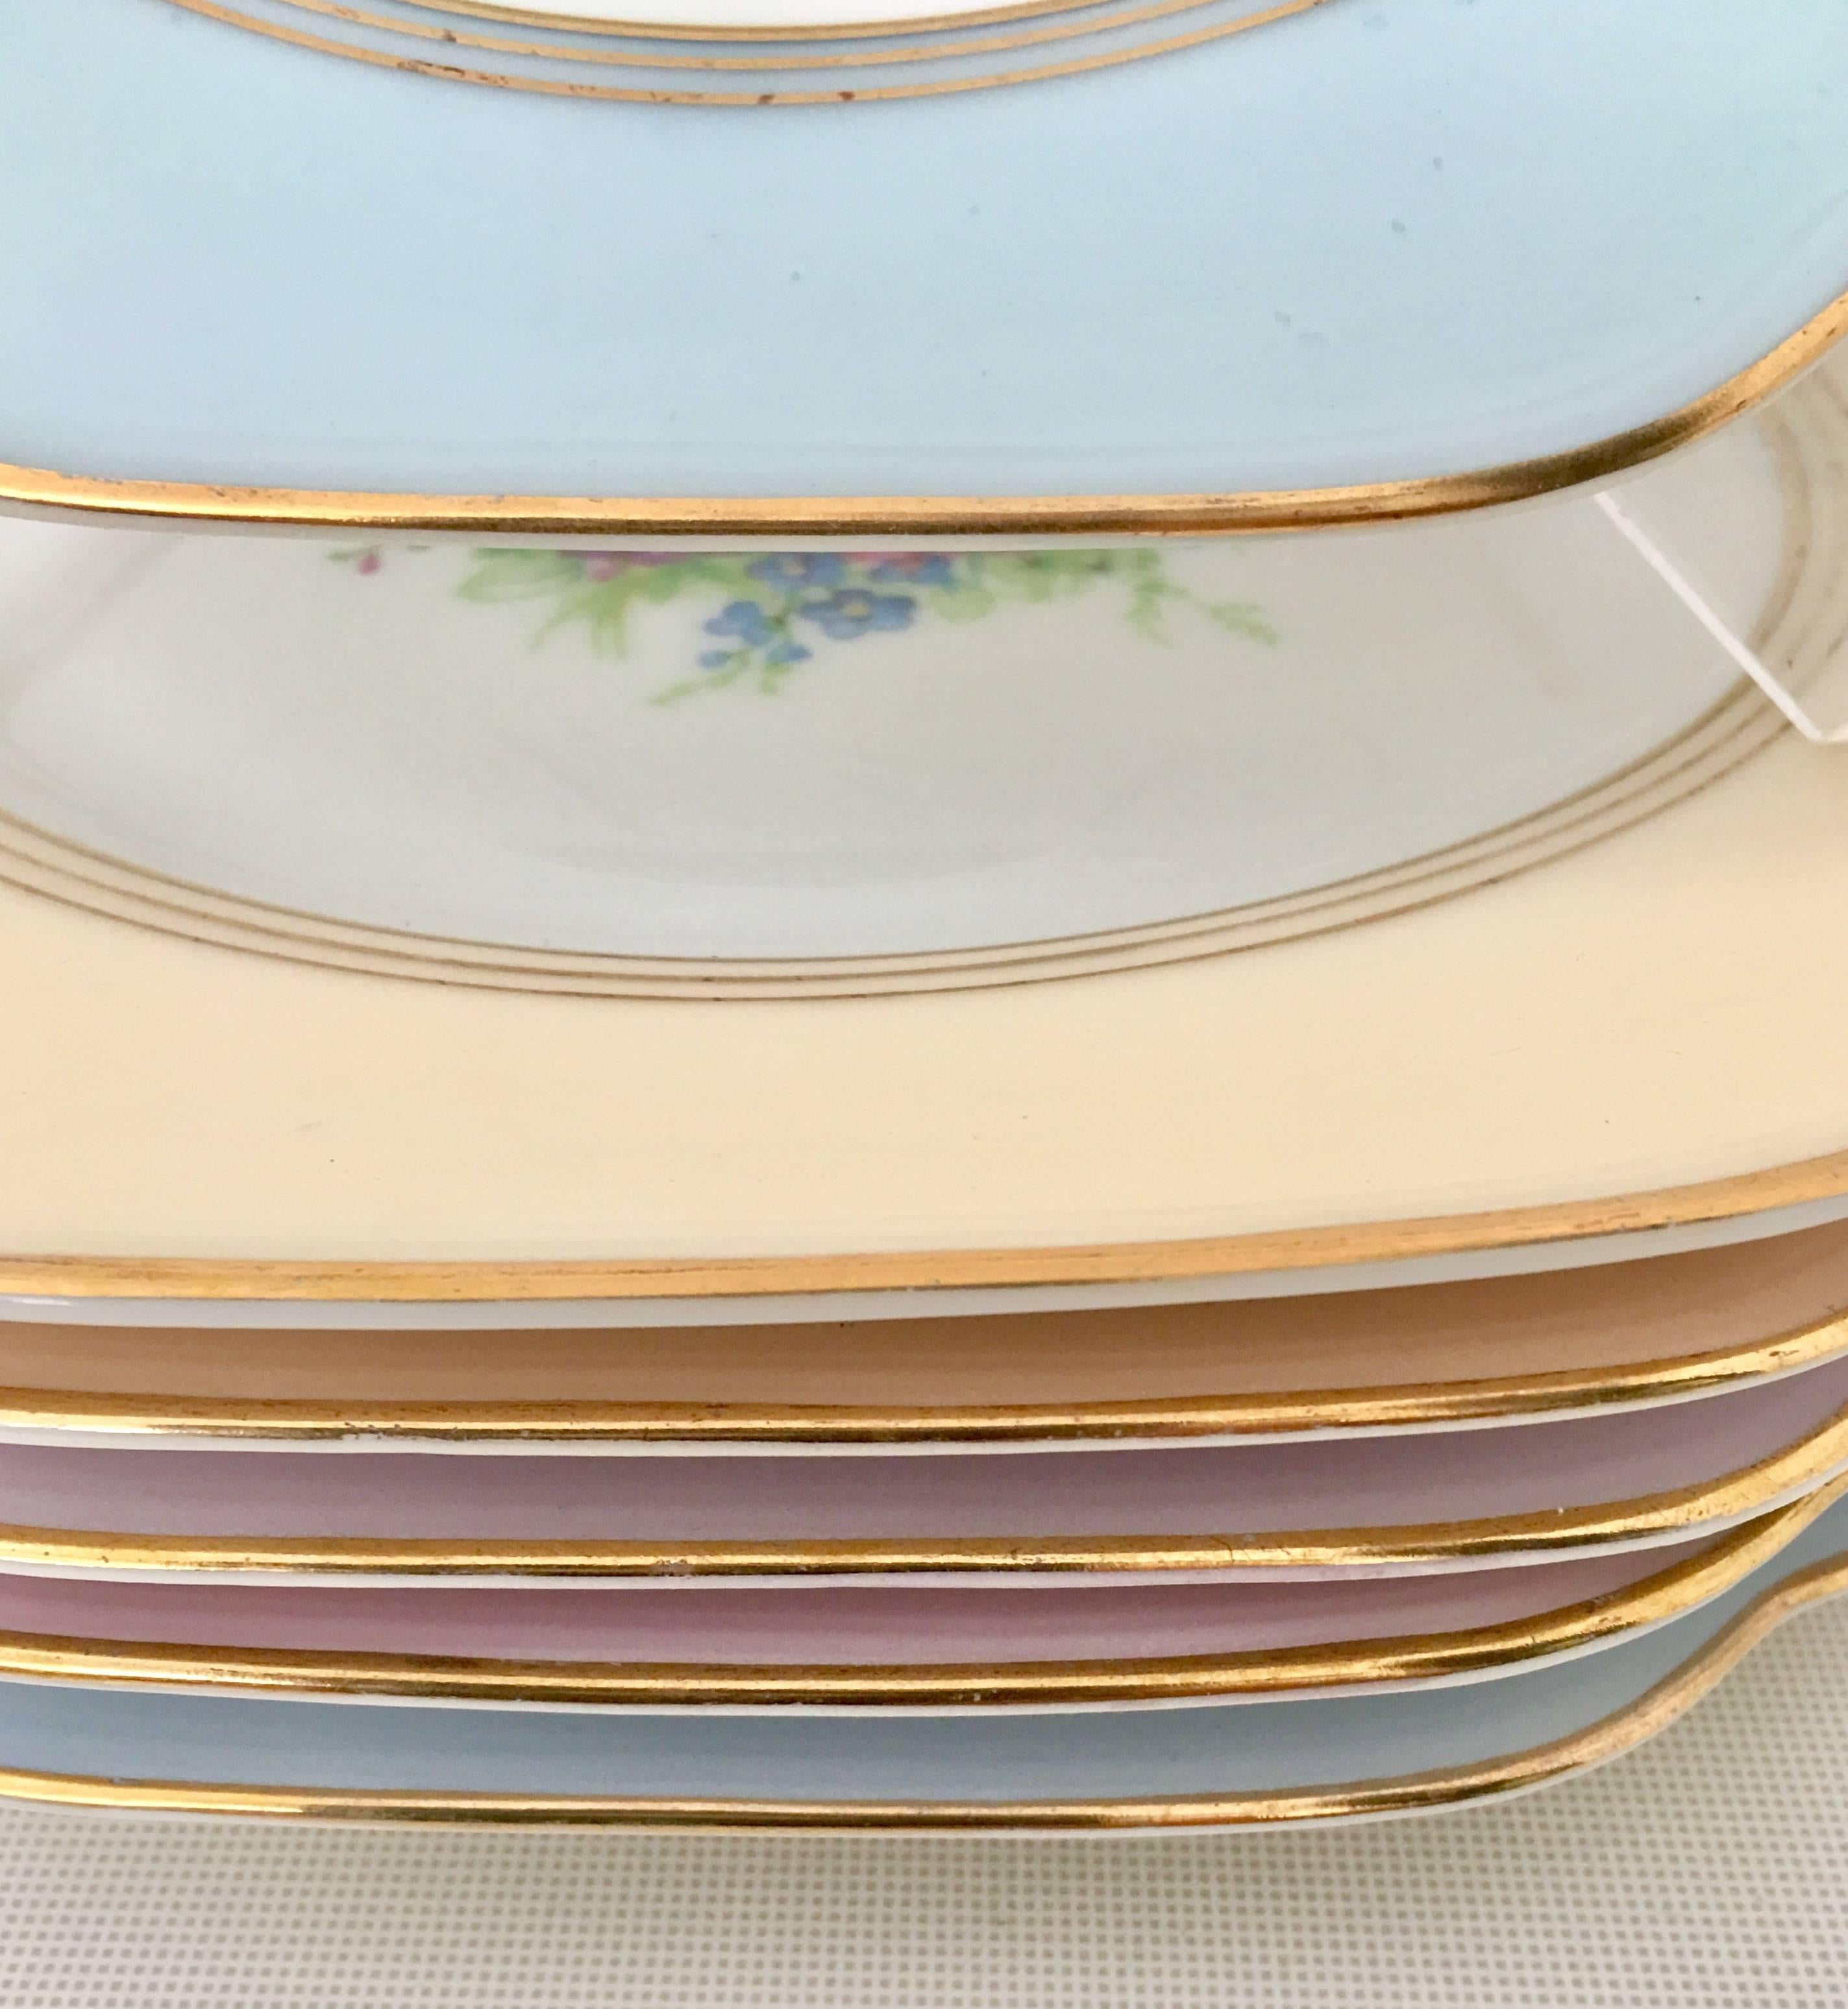 Beautiful hand-painted pastel border with central floral boquet and 22 karat gold rim scalloped dessert plate set of seven pieces by, Charles Arenfeldt, France. Each plate has a different color band and each plate is signed on the underside, France